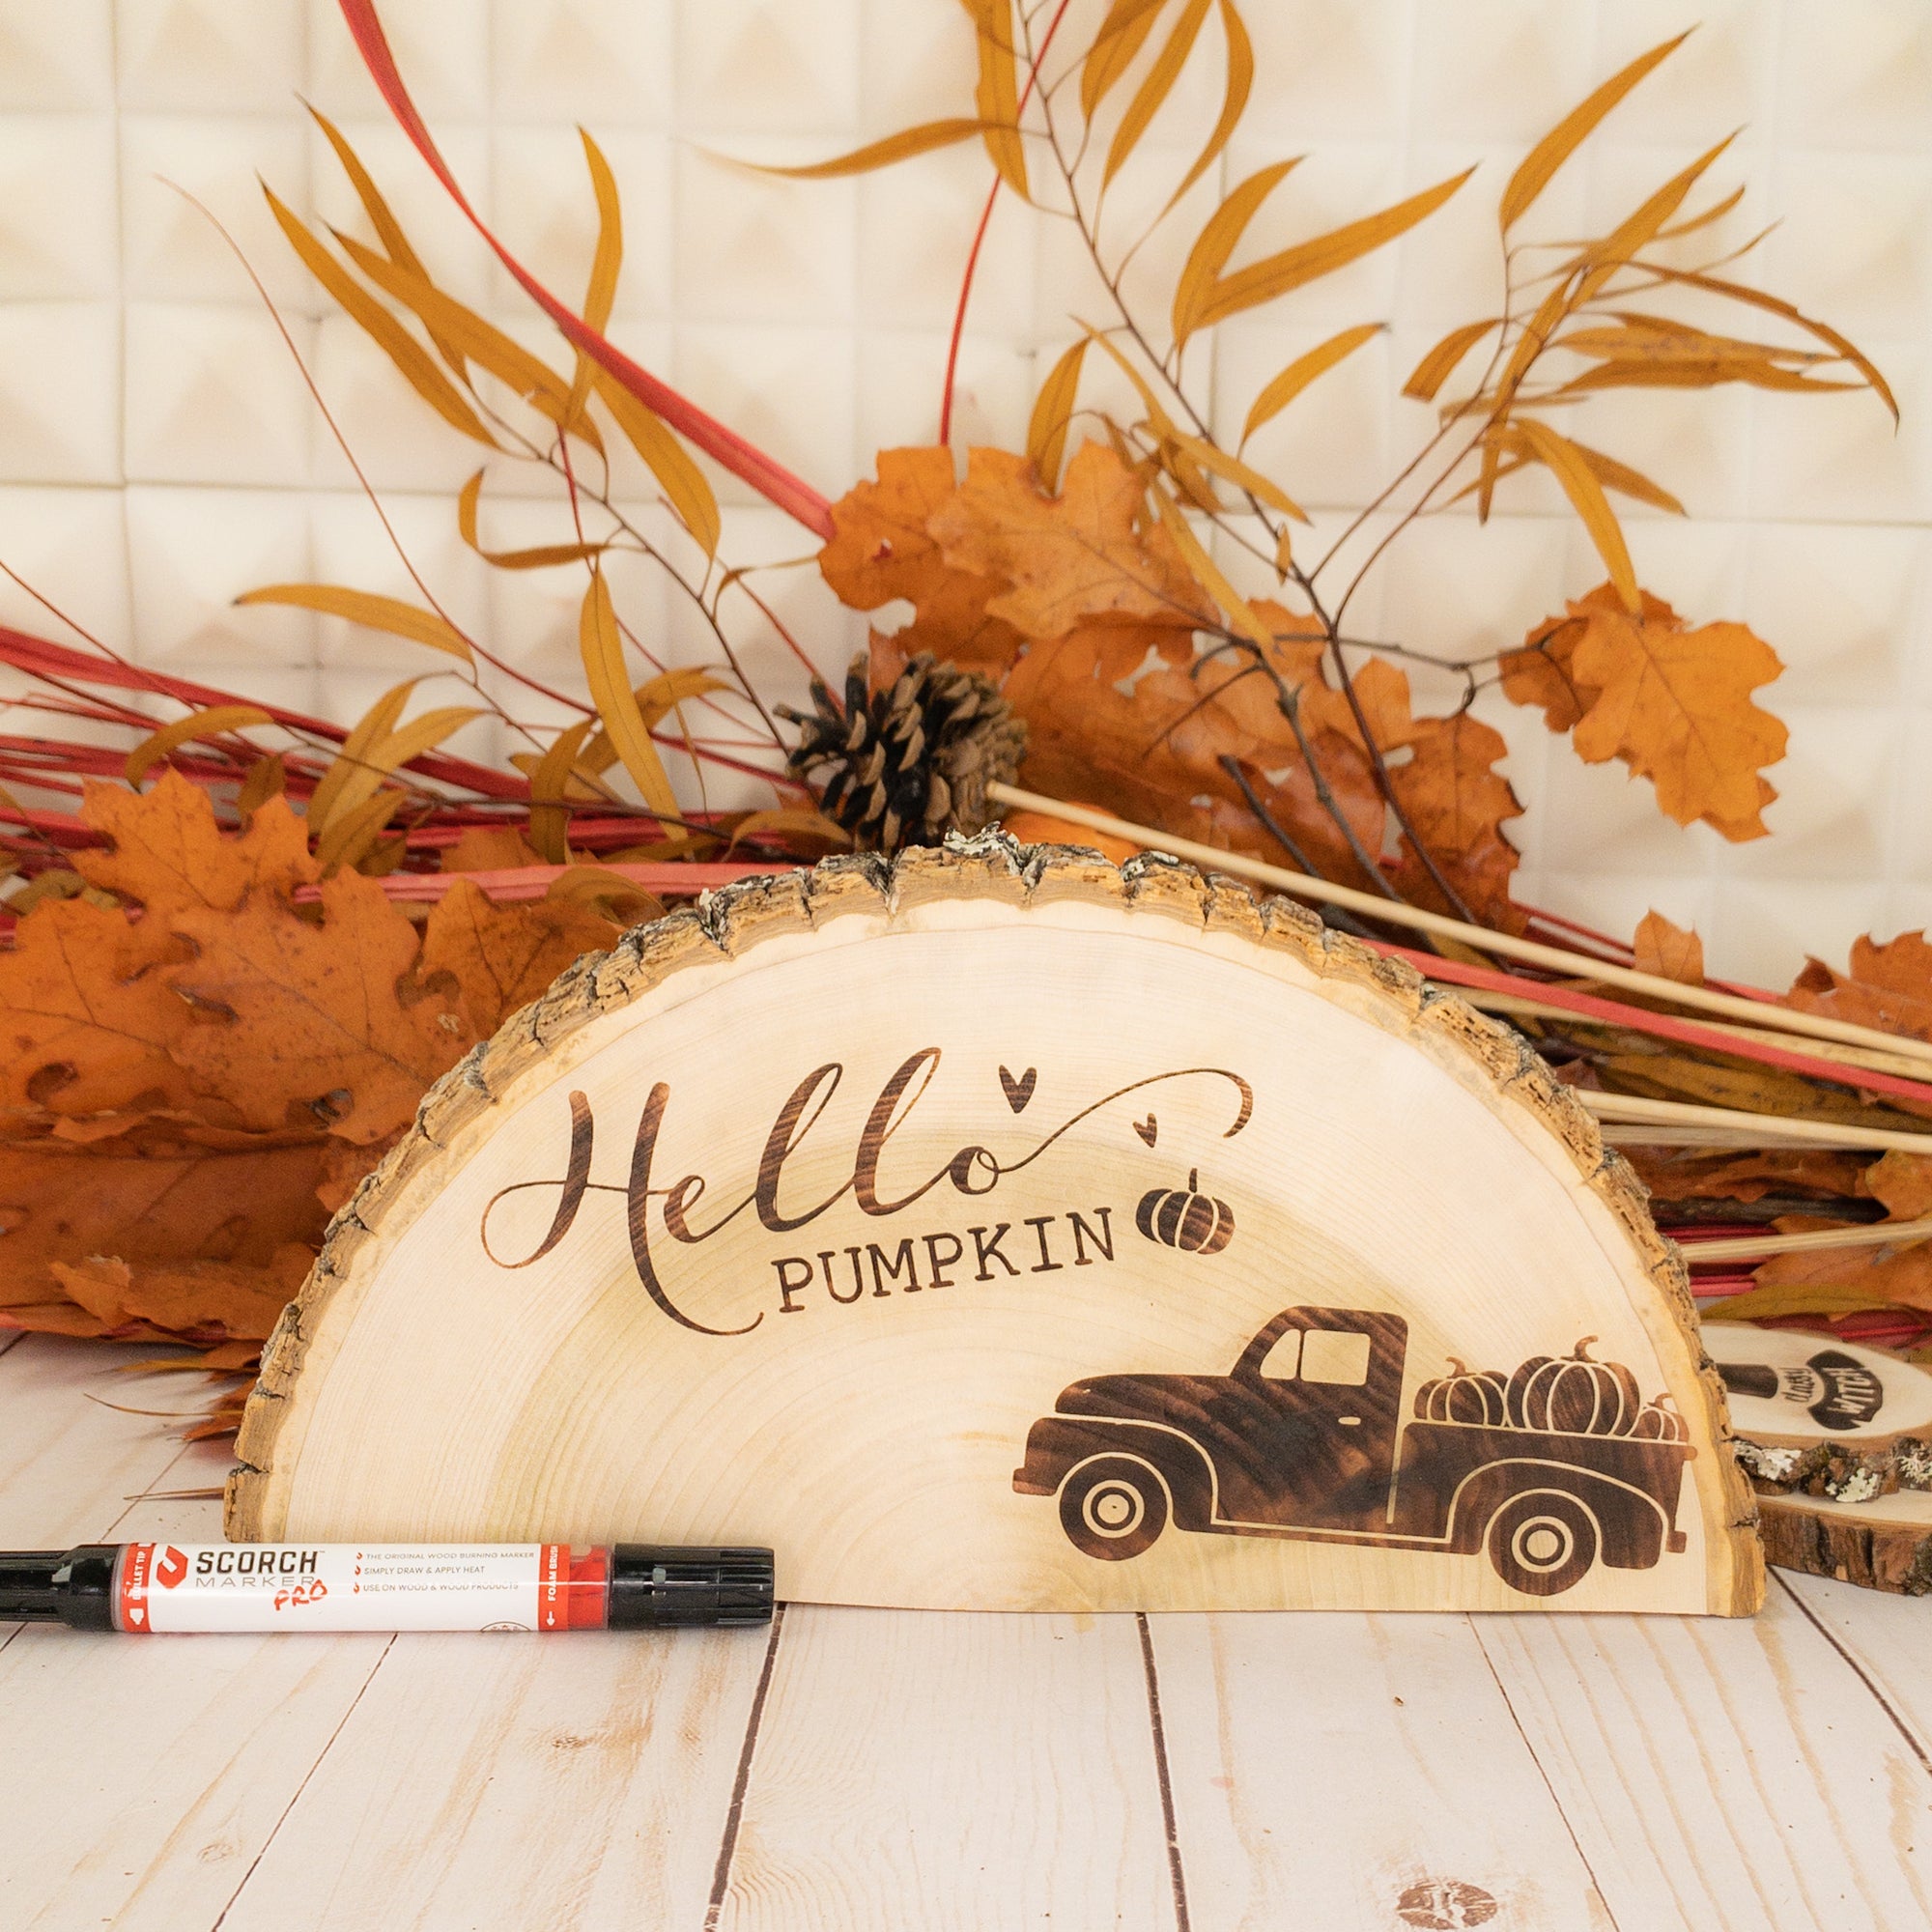 4 Wood Burning Craft Ideas that are Perfect for October